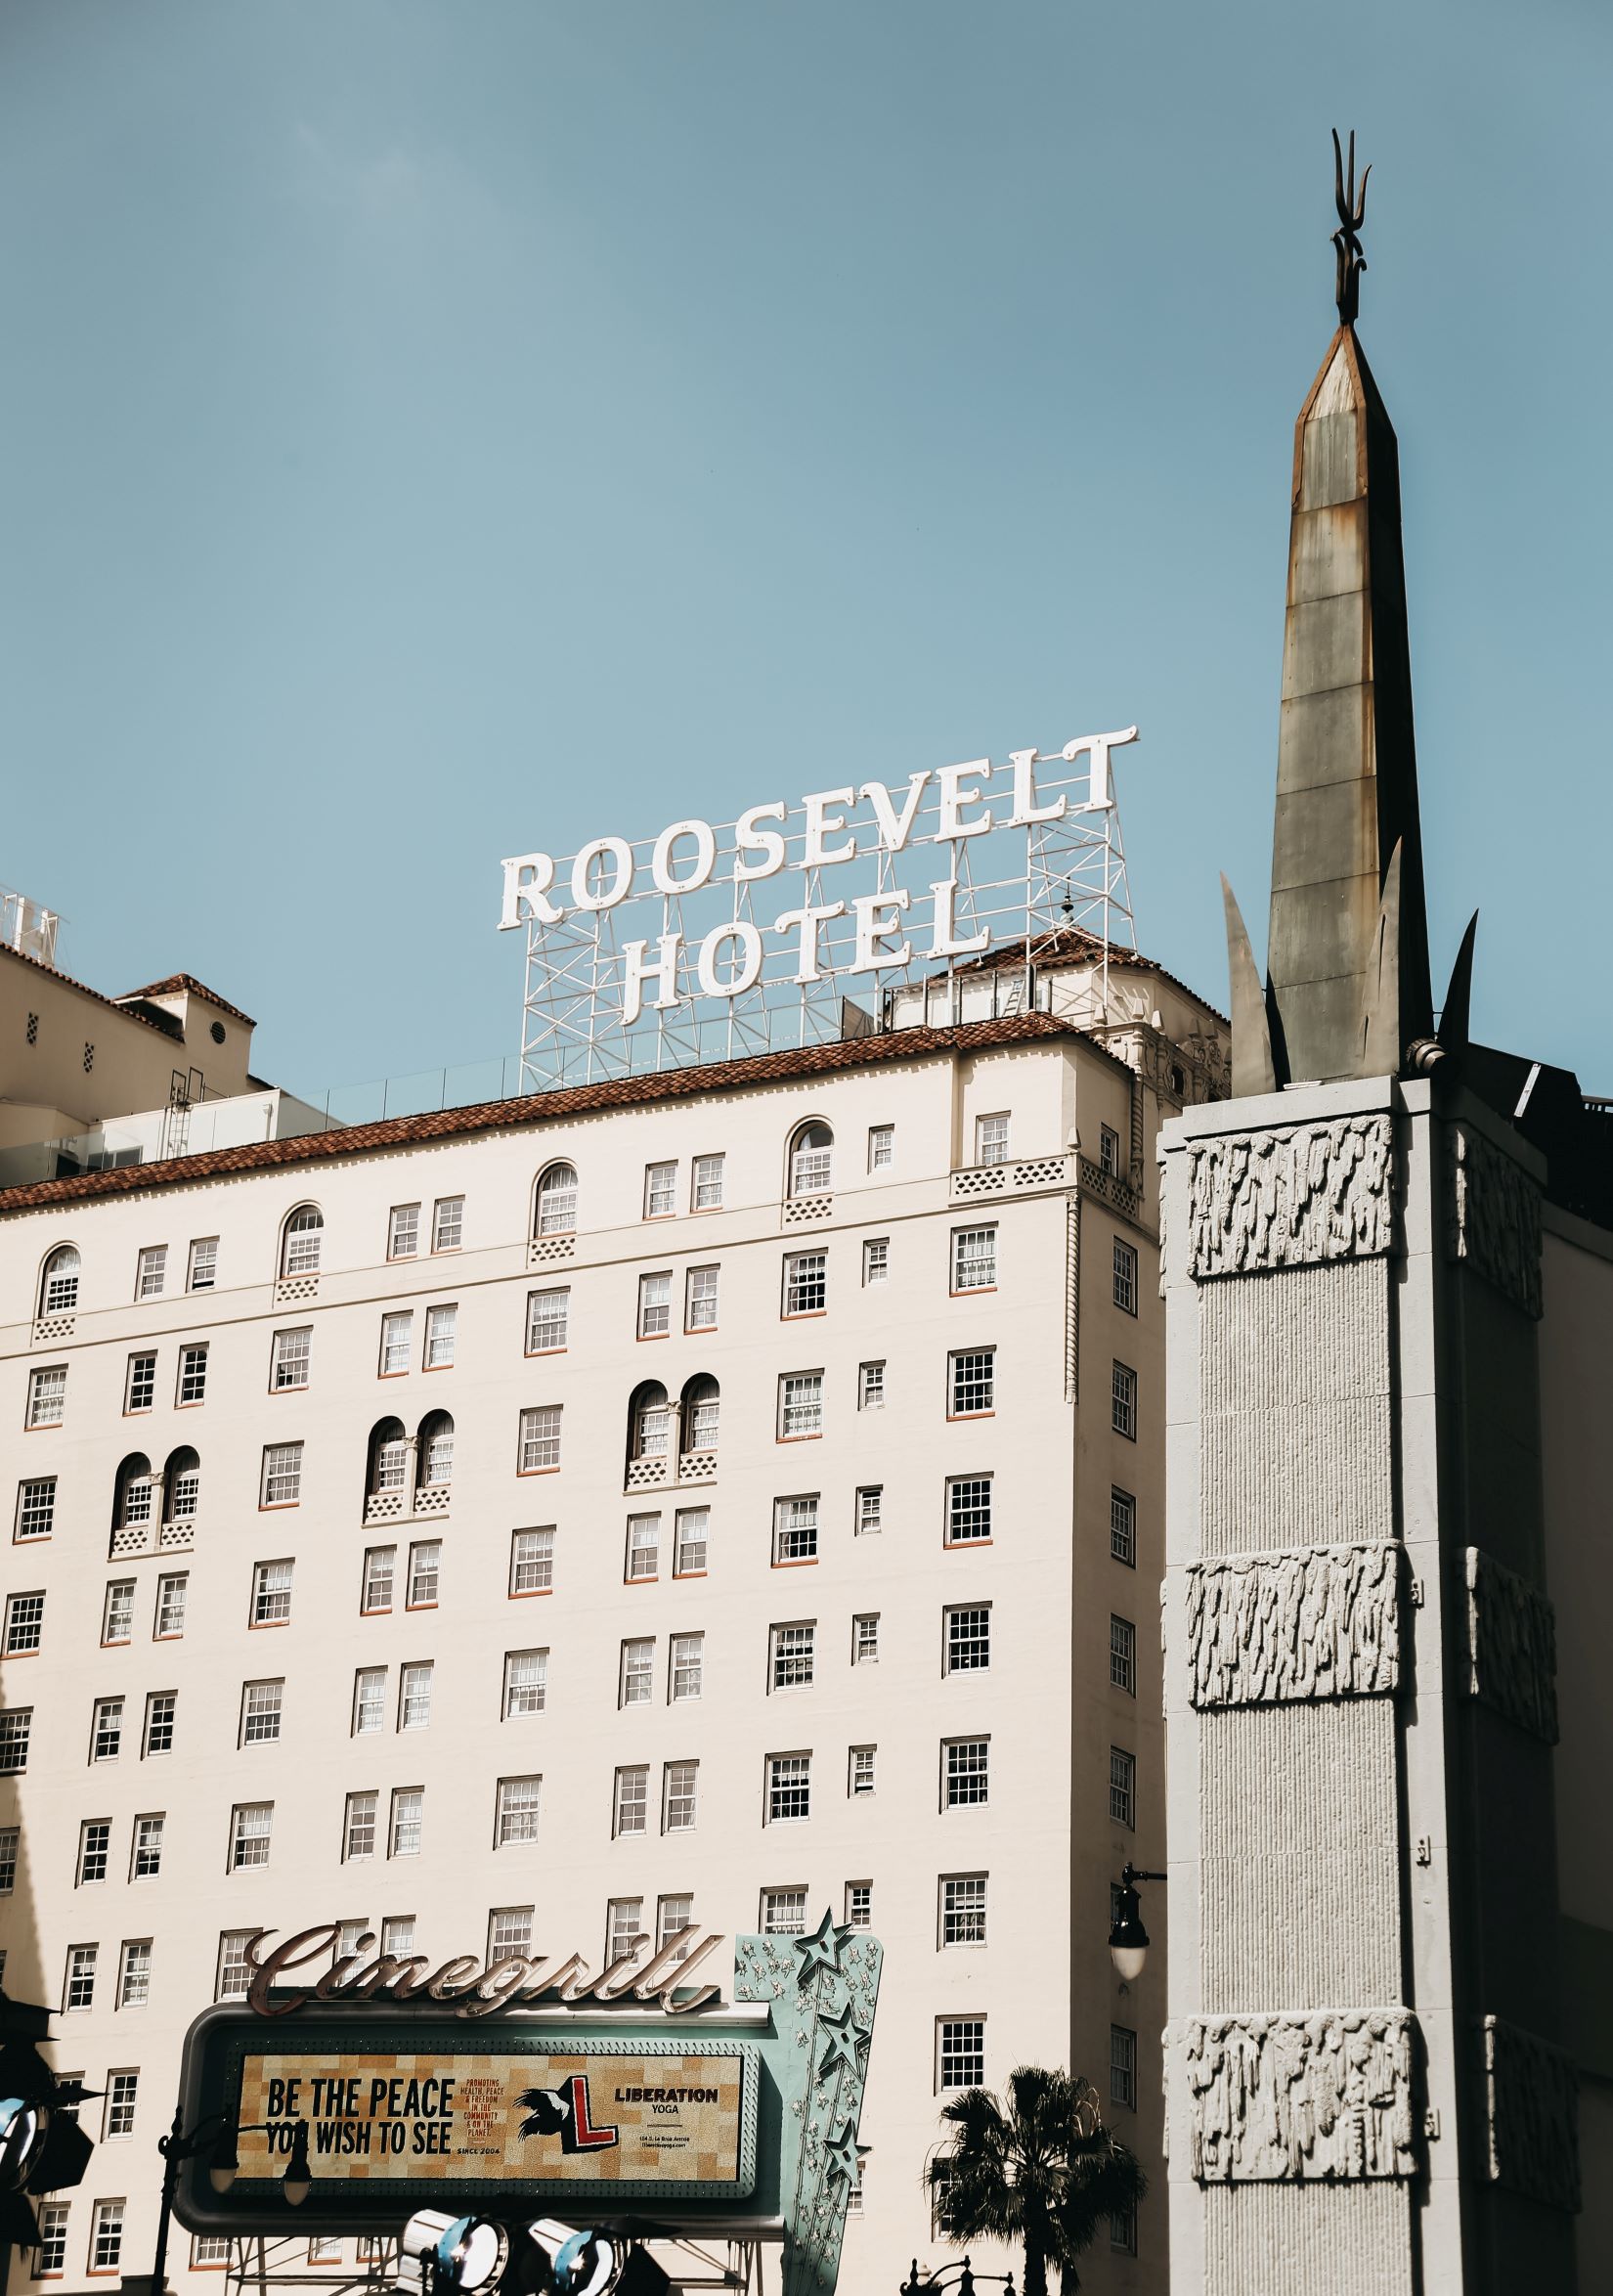 An image of the Roosevelt Hotel.